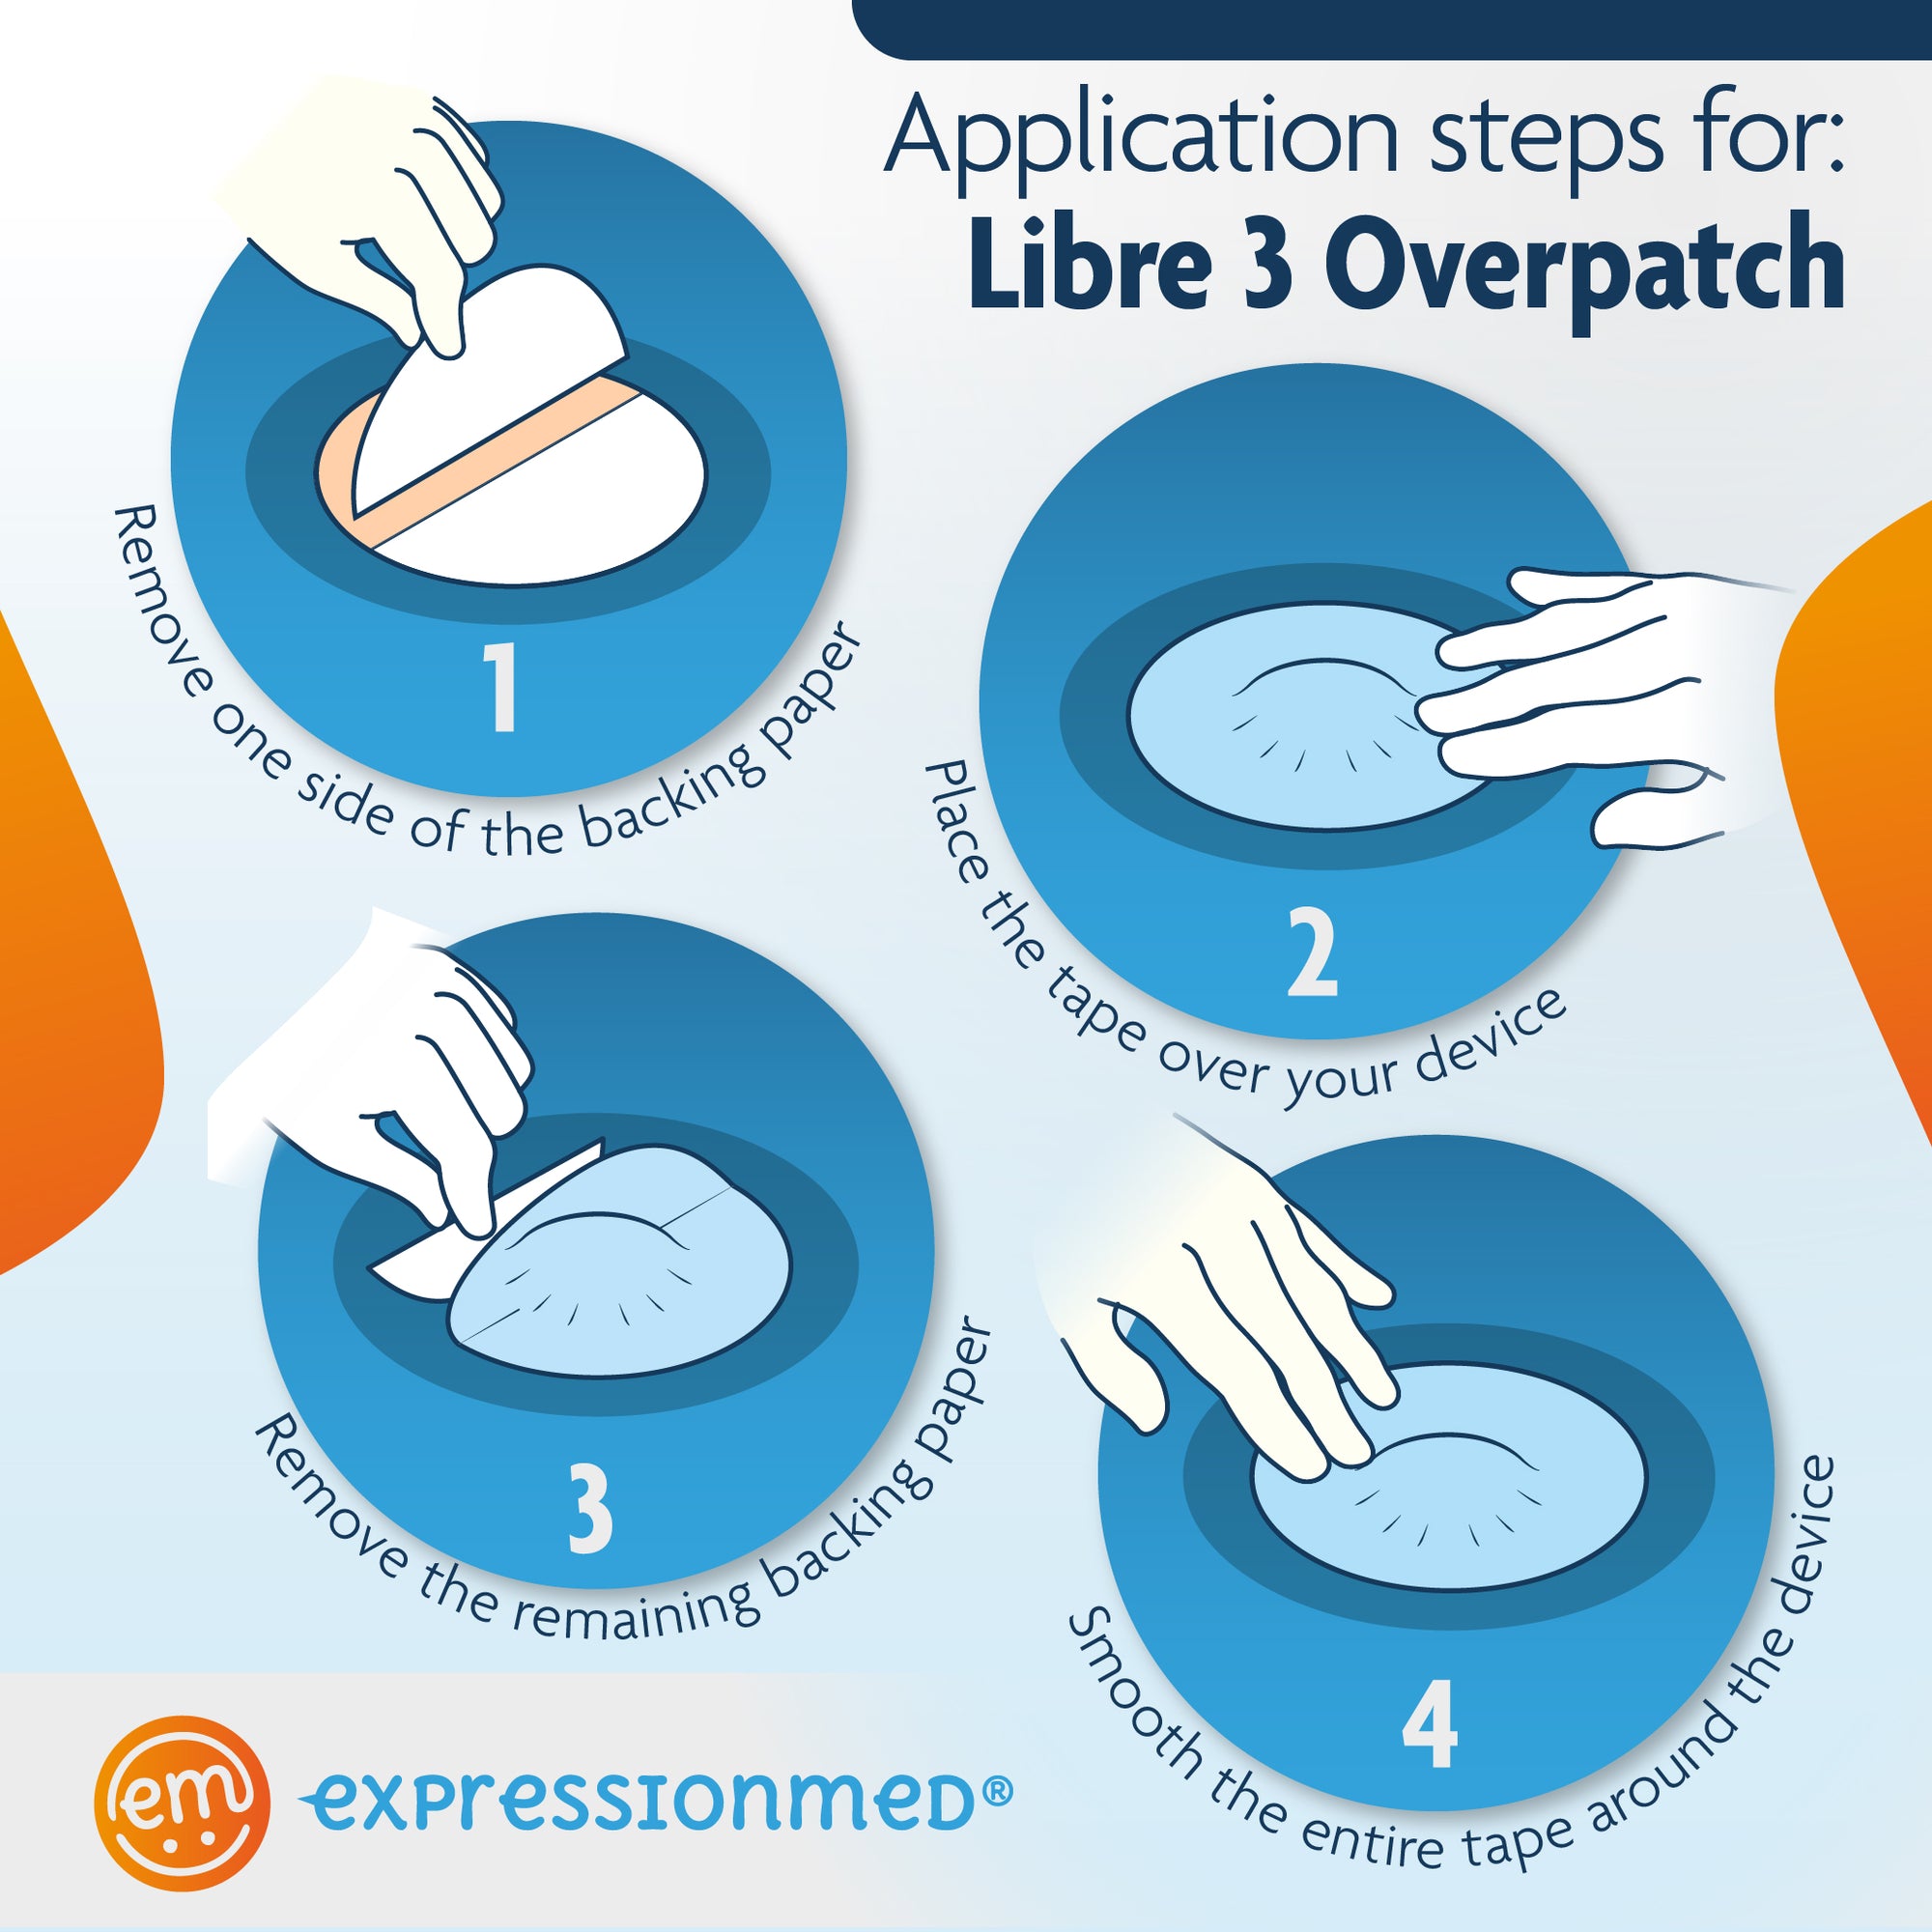 ExpressionMed Libre 3 Overpatch Adhesive Tape Application Instructions